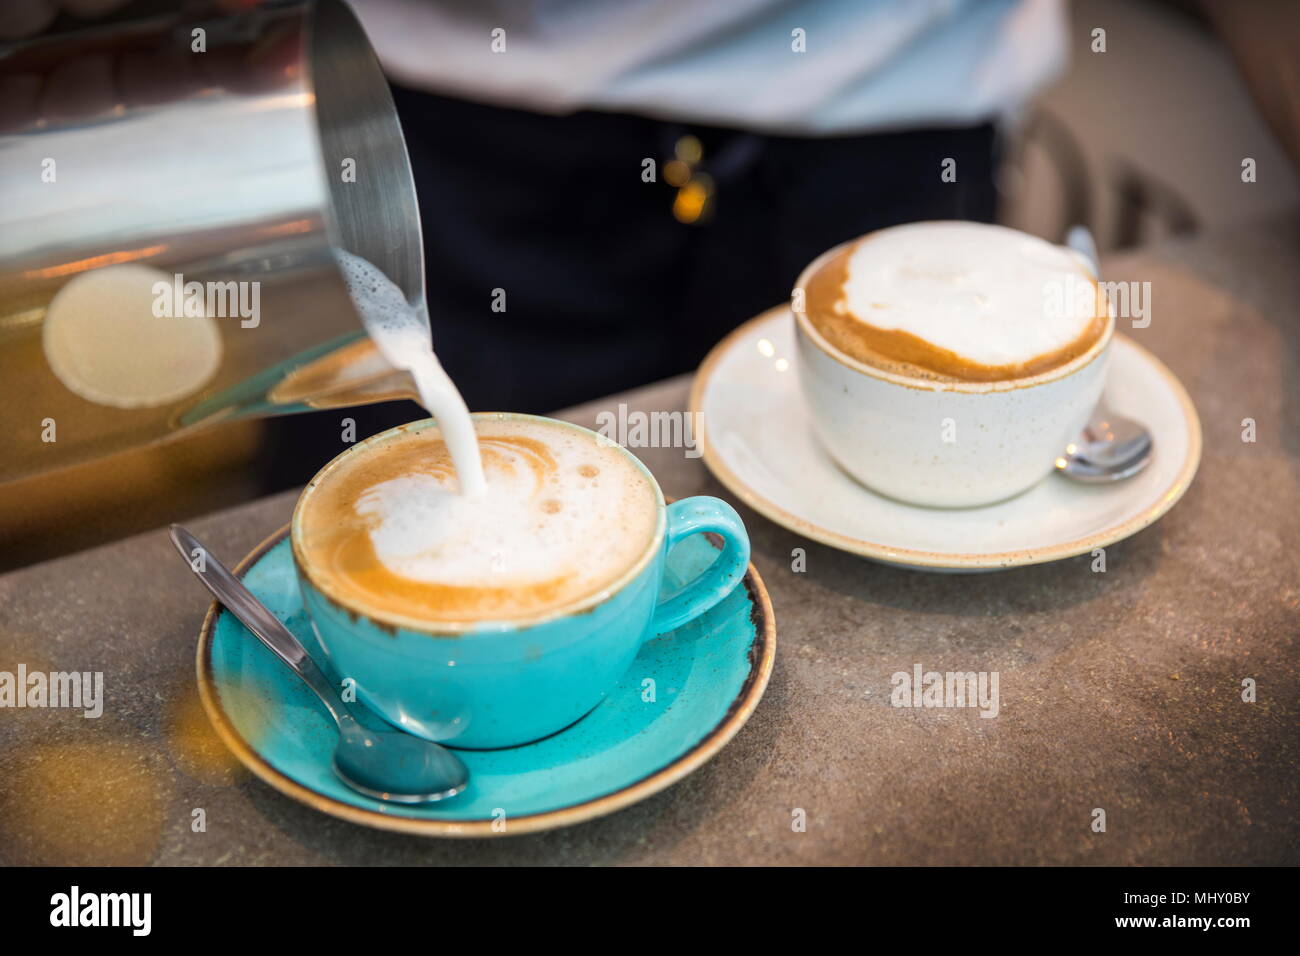 Barista pouring frothy milk into coffee cup, close-up Stock Photo